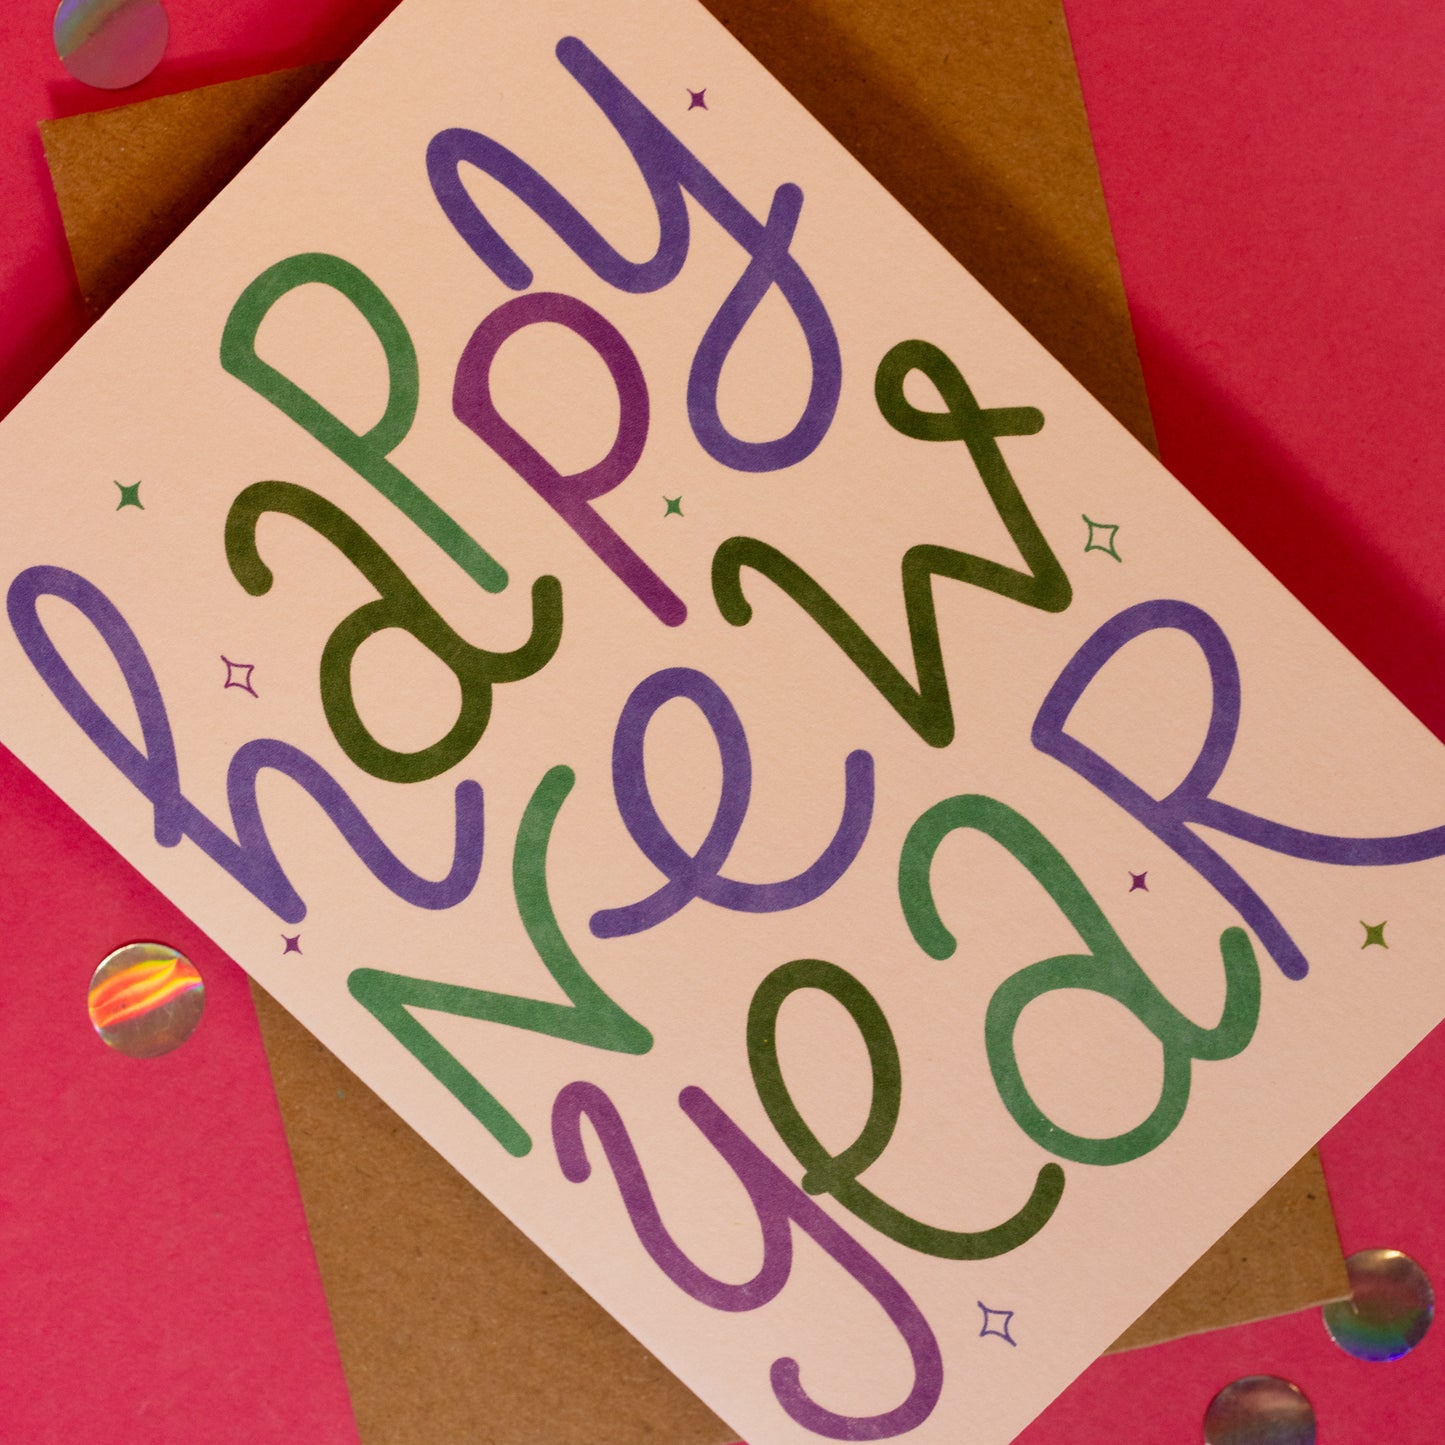 Sparkle Happy New Year Card